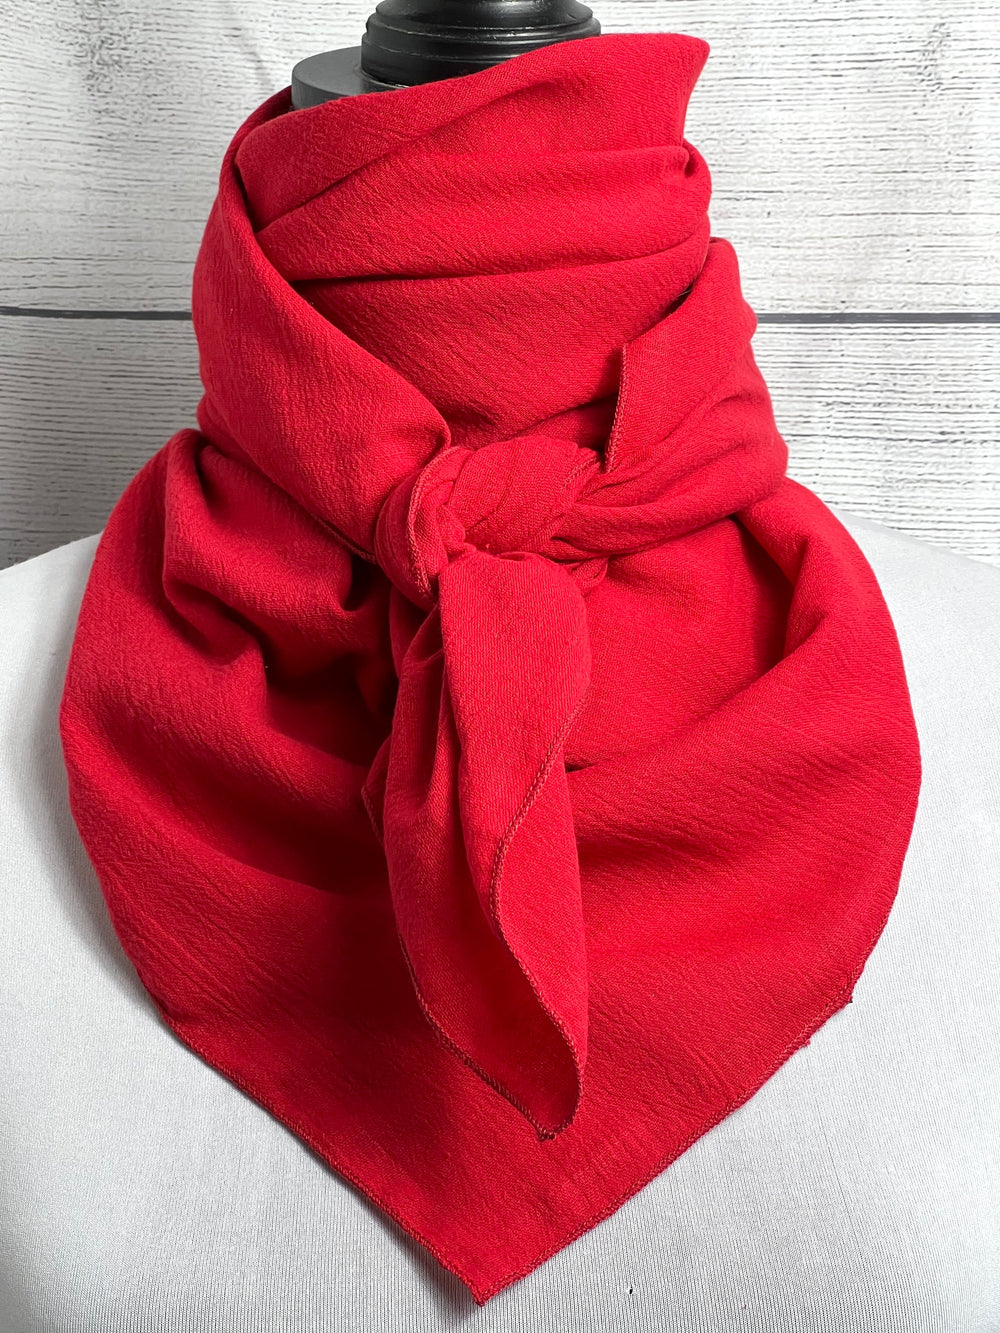 Solid Red Cotton Gauze Rag